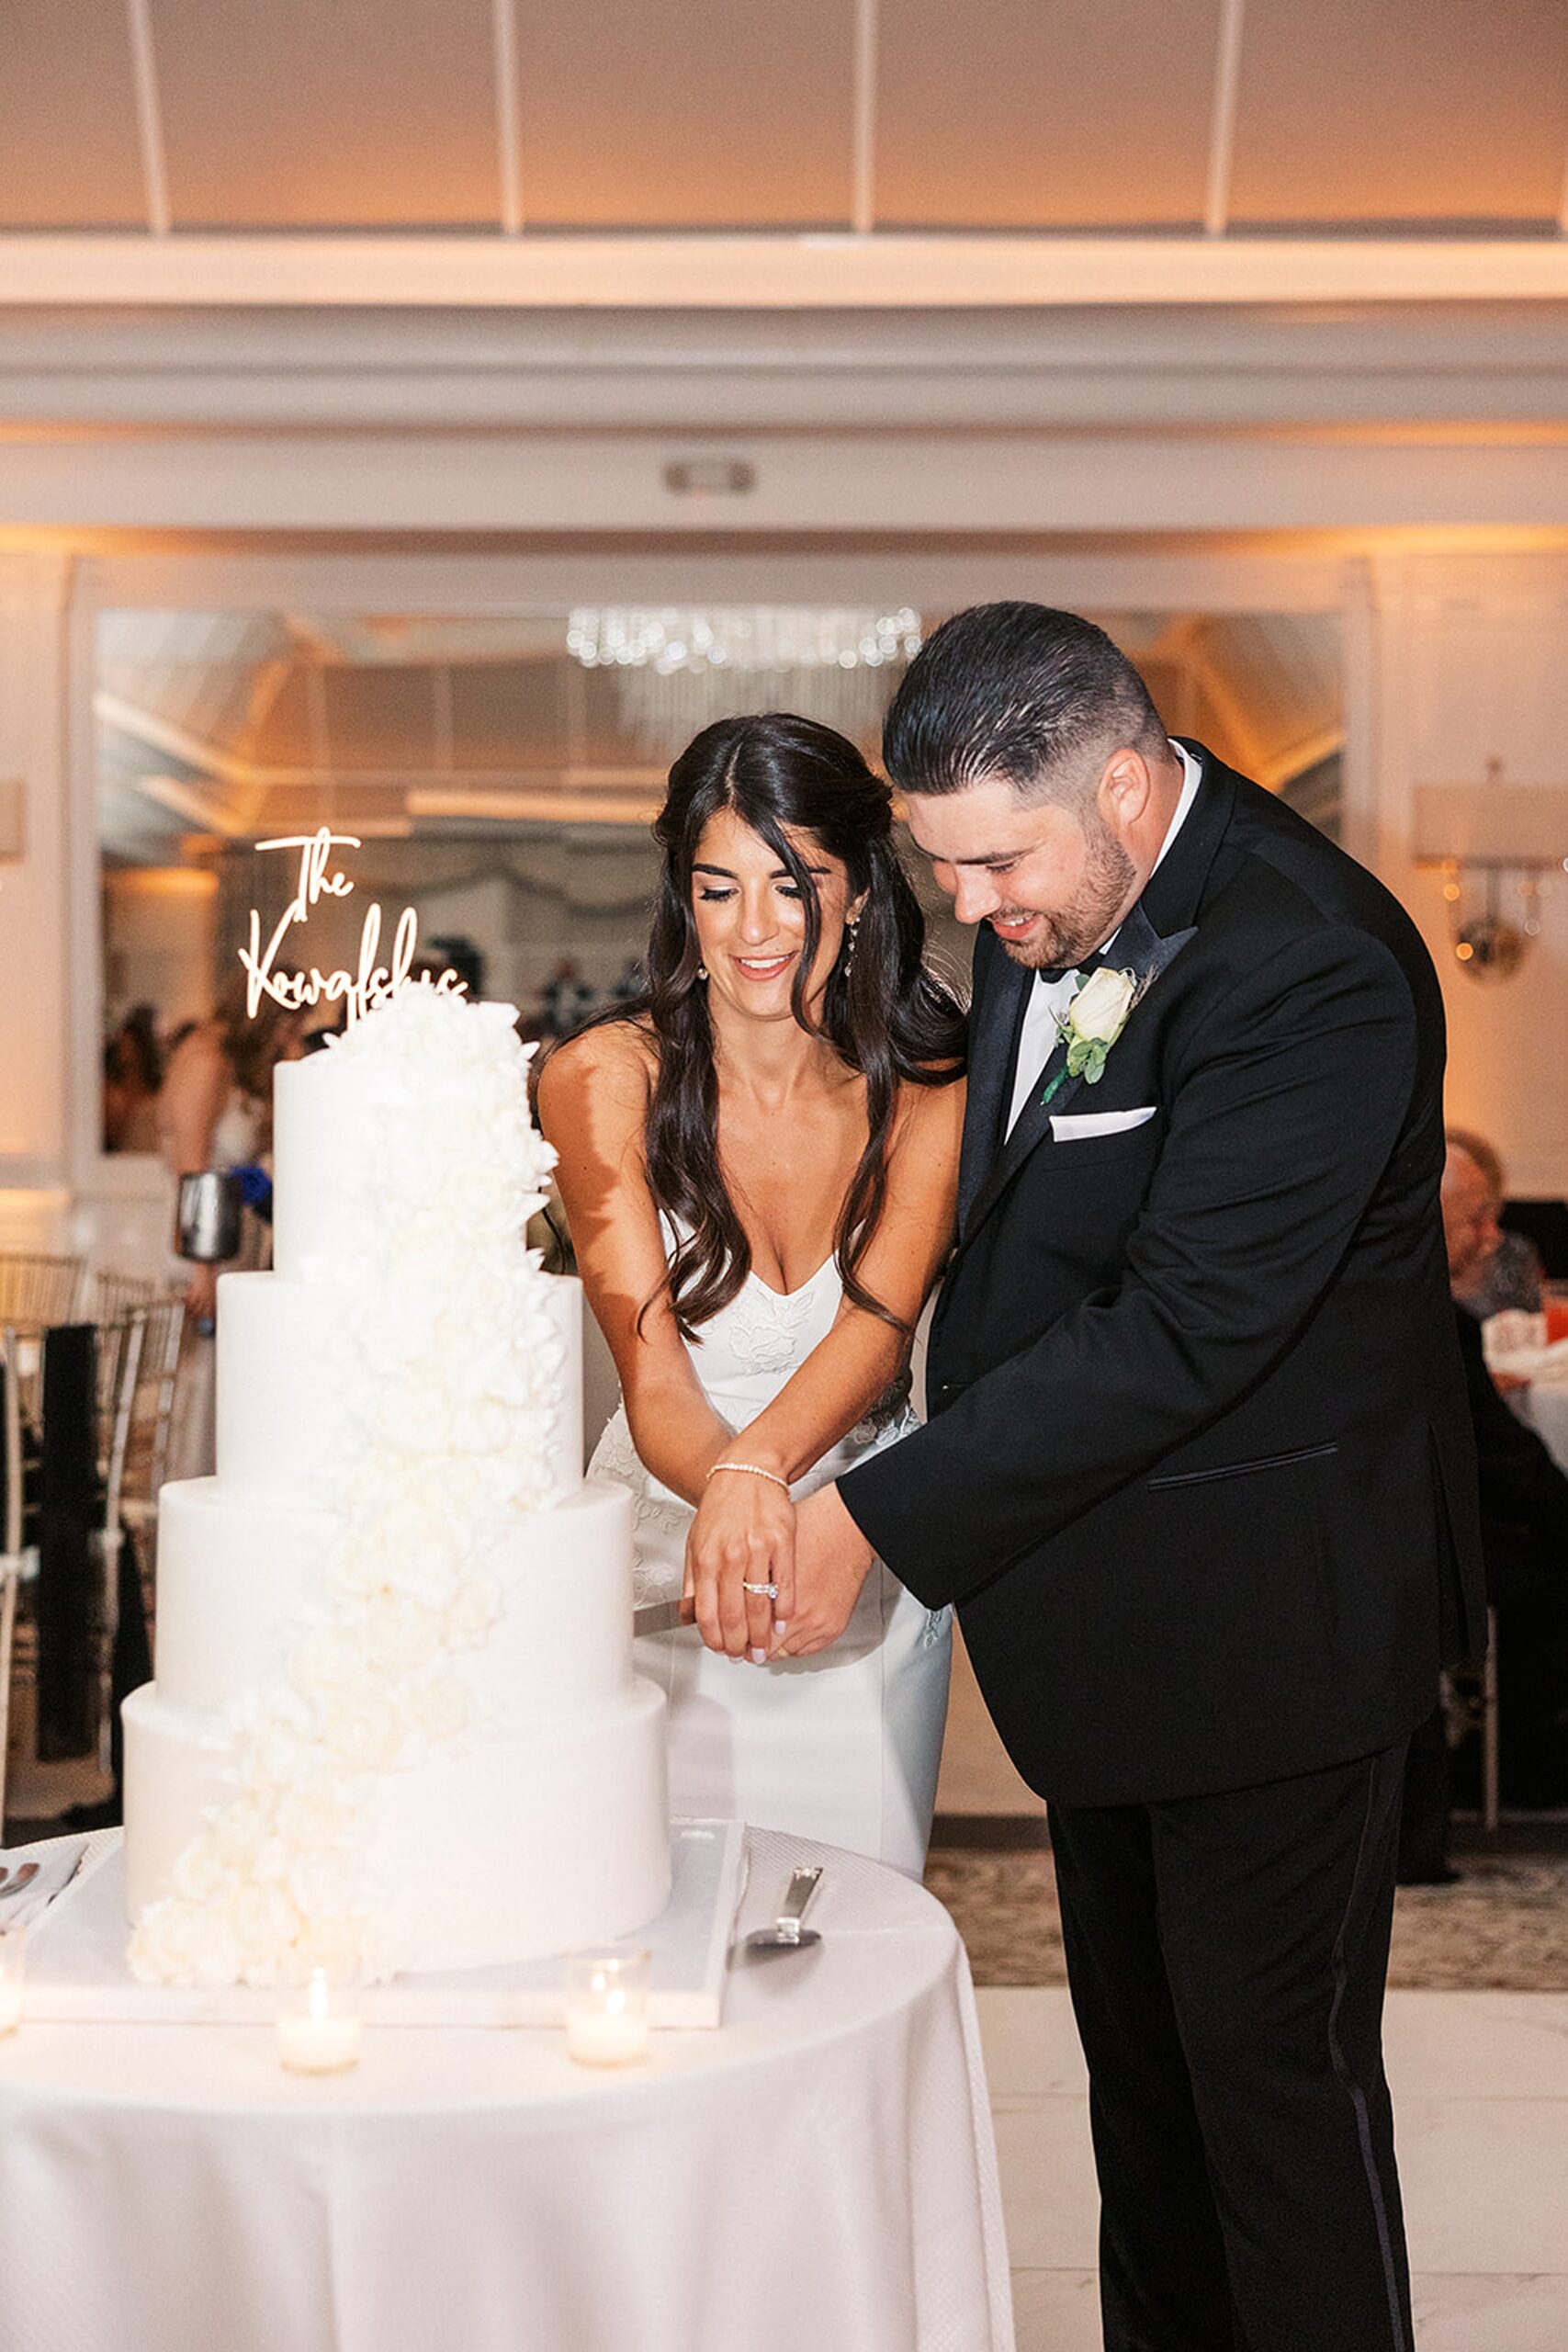 Newlyweds cut their four tier white wedding cake together at a edgewood country club wedding